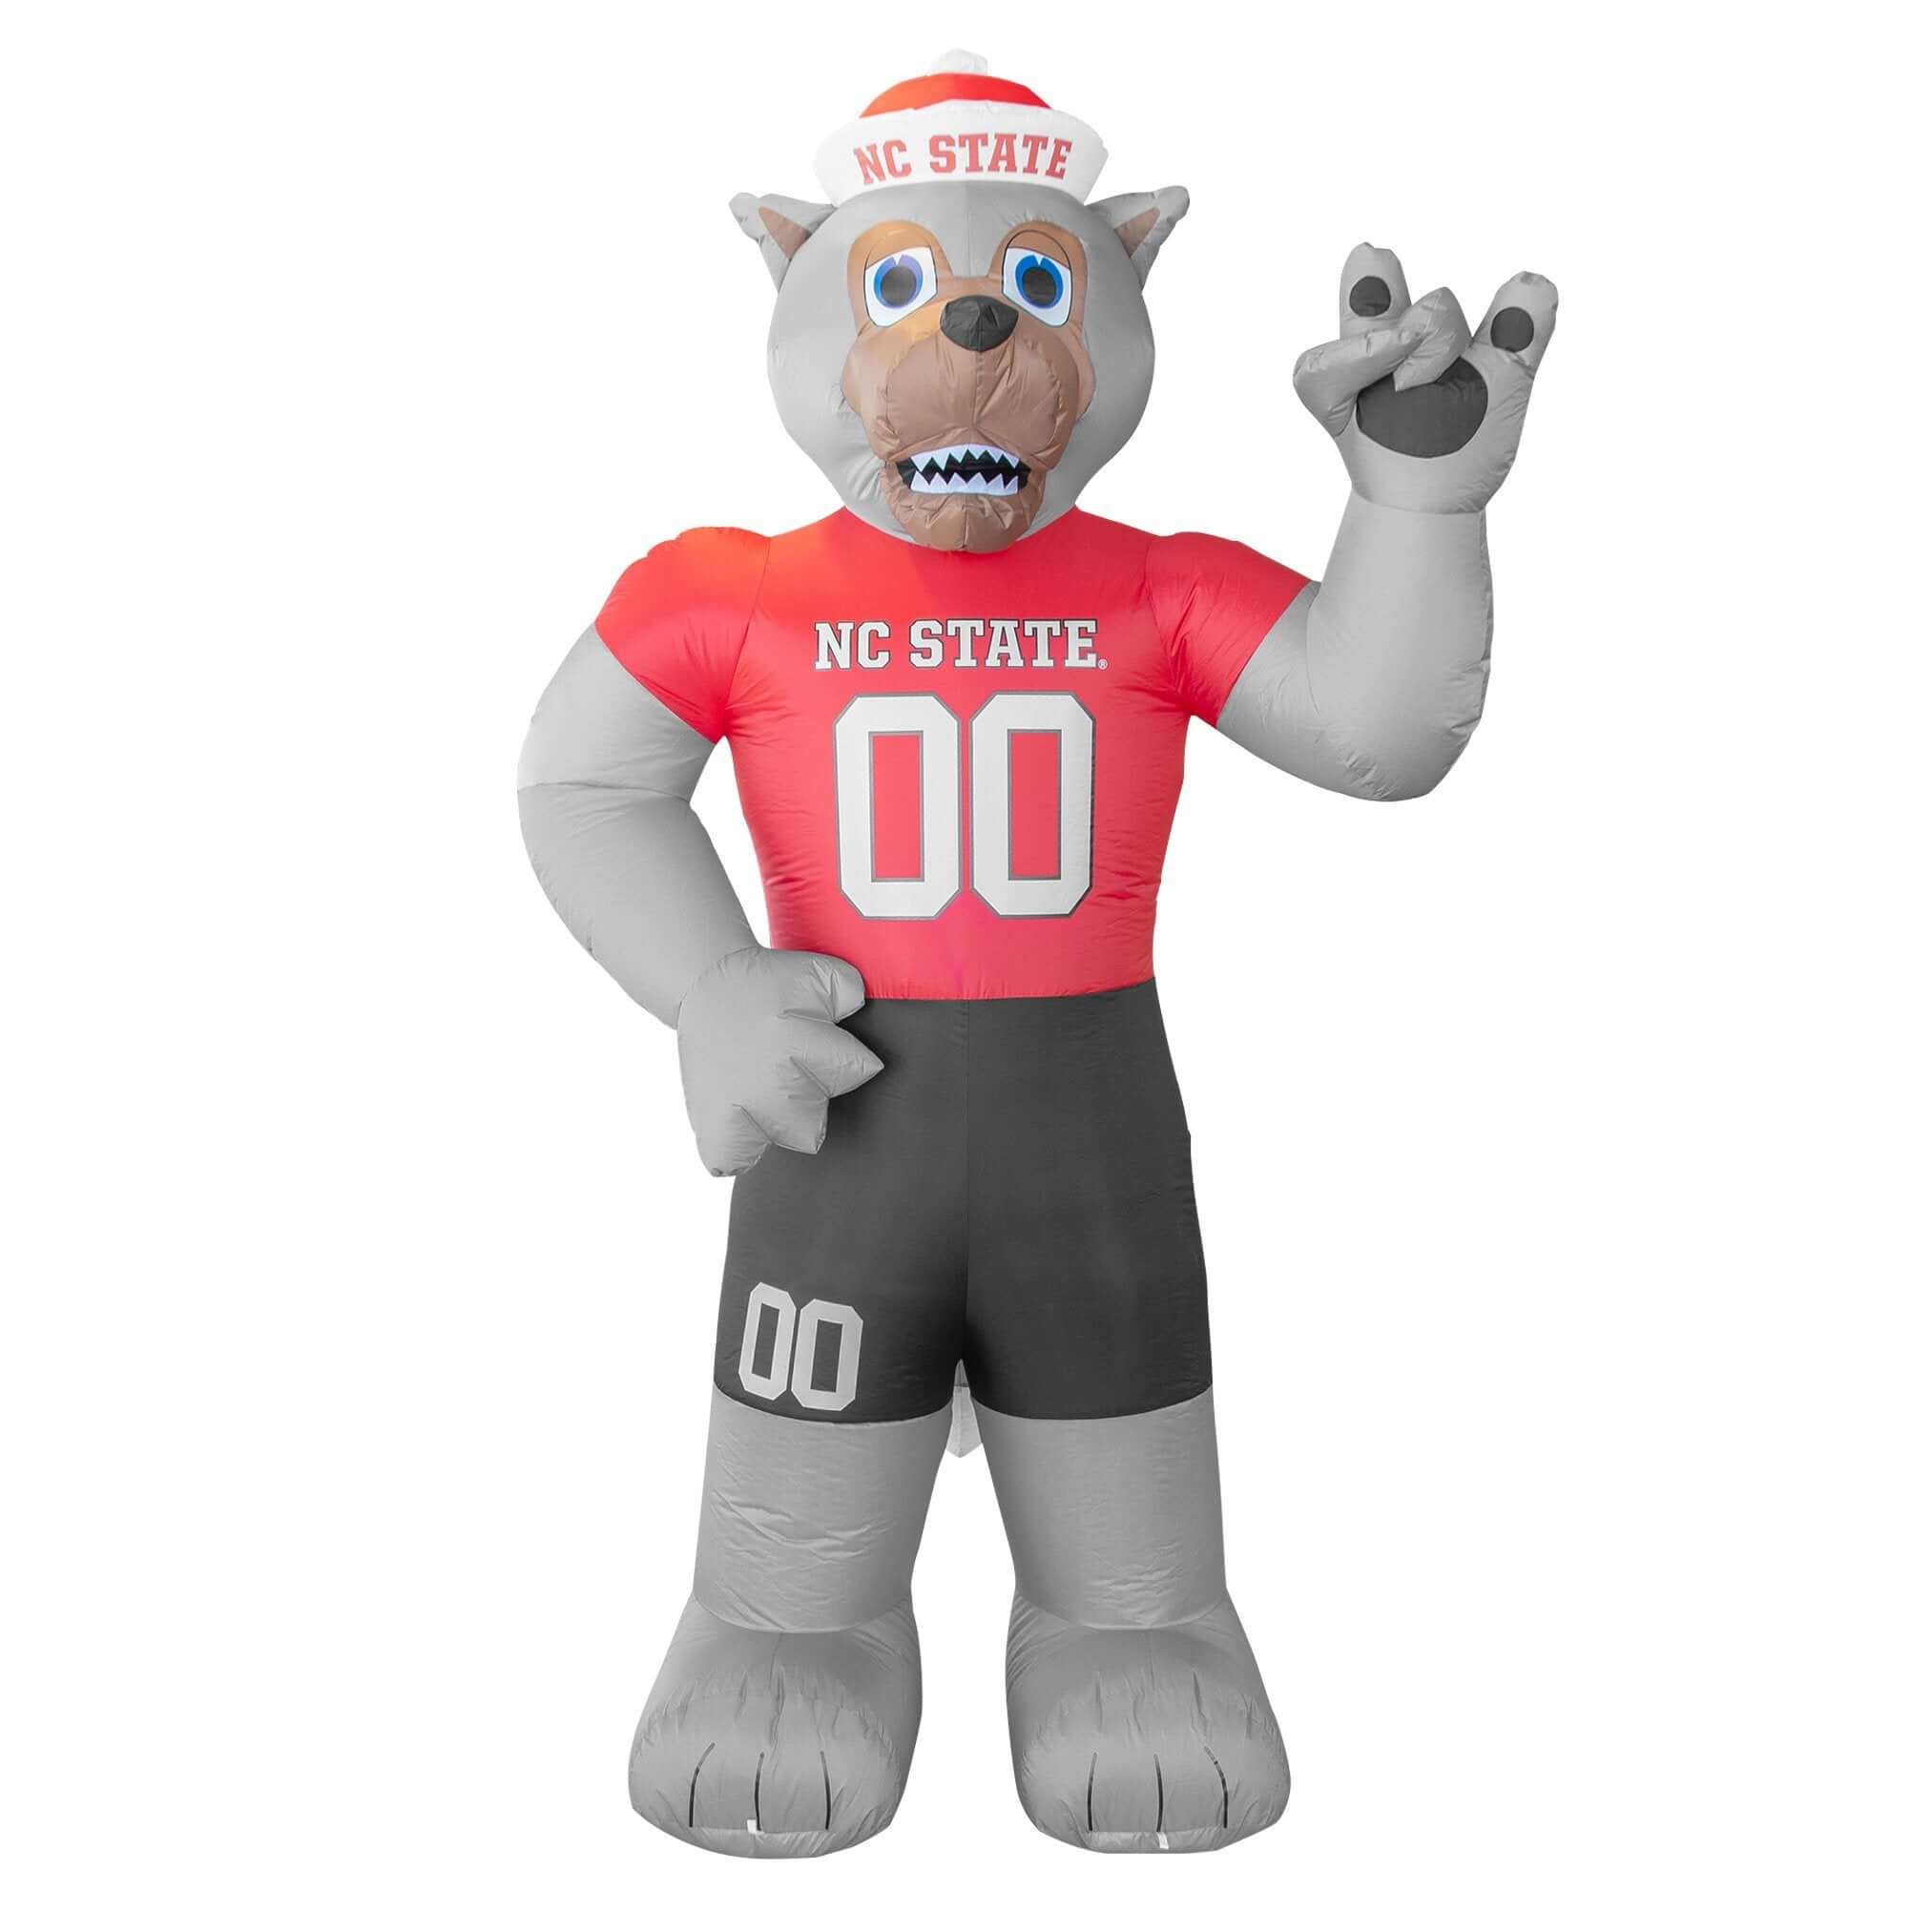 Georgia State Of Champions 2021 Mascot Go Dawgs And Go Braves